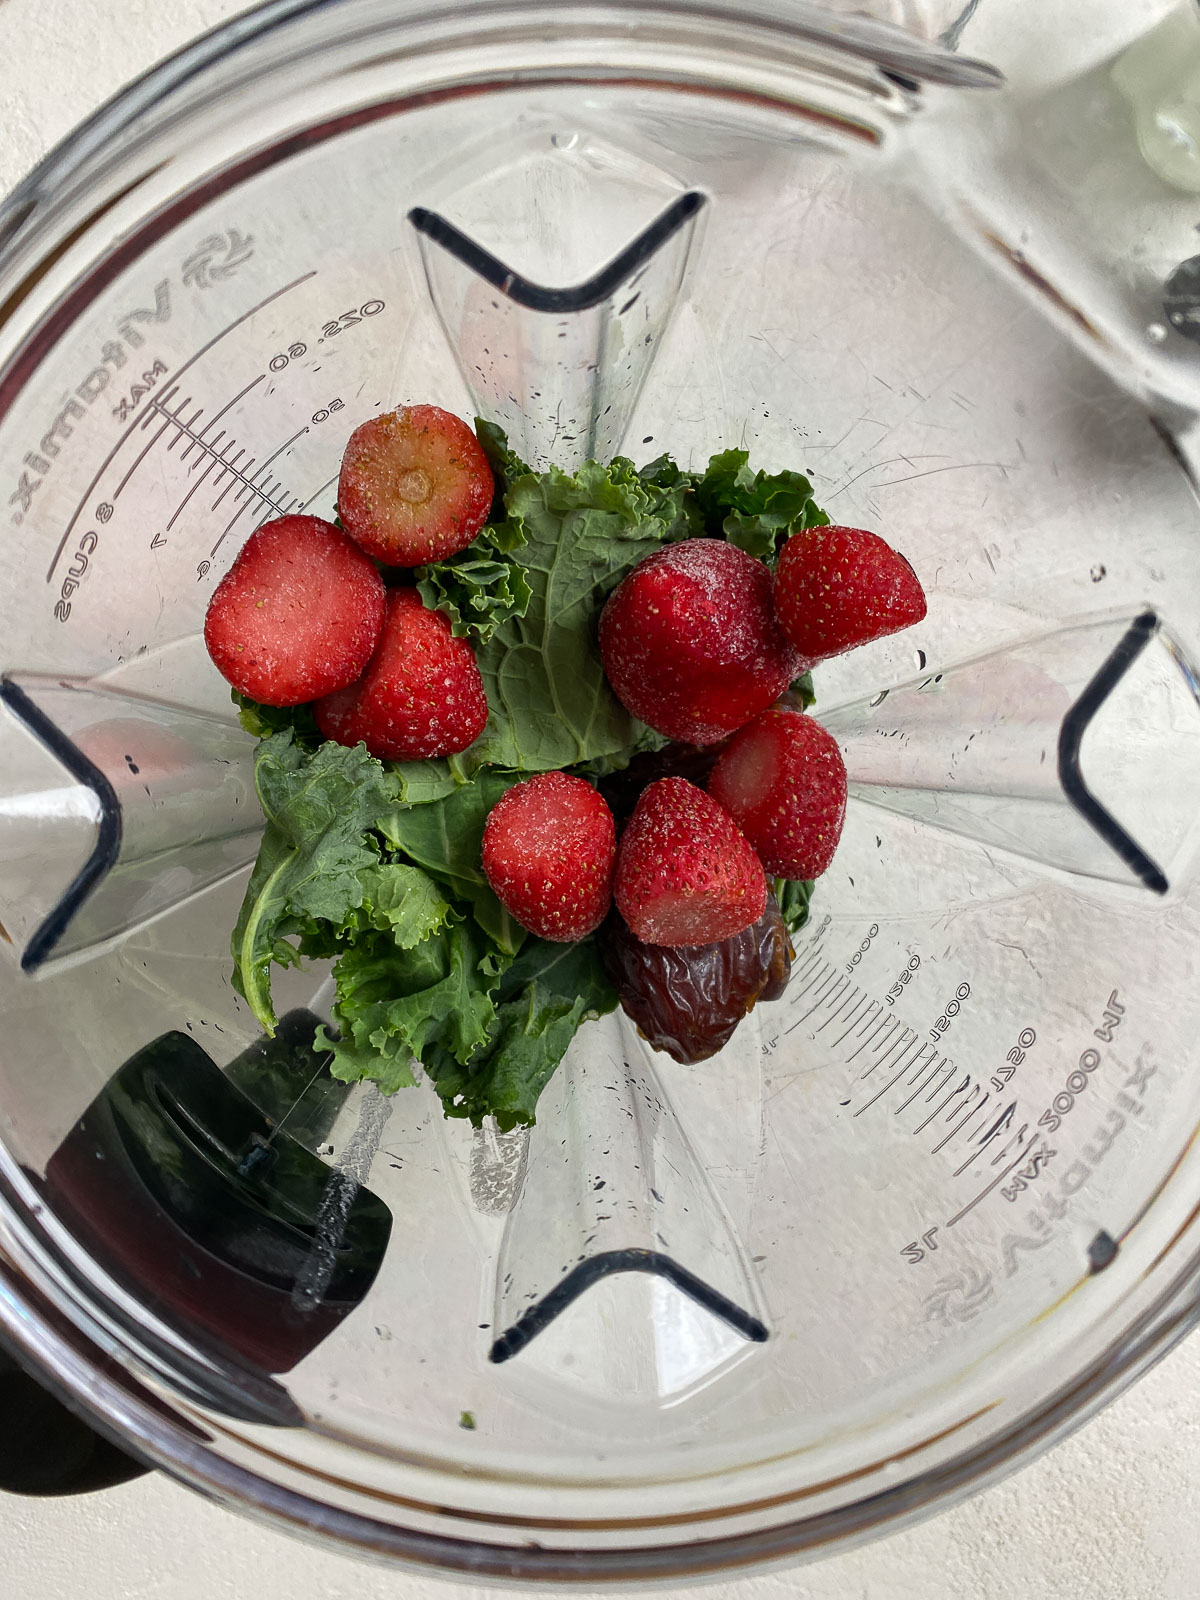 ingredients for Strawberry Kale Smoothie in a blender